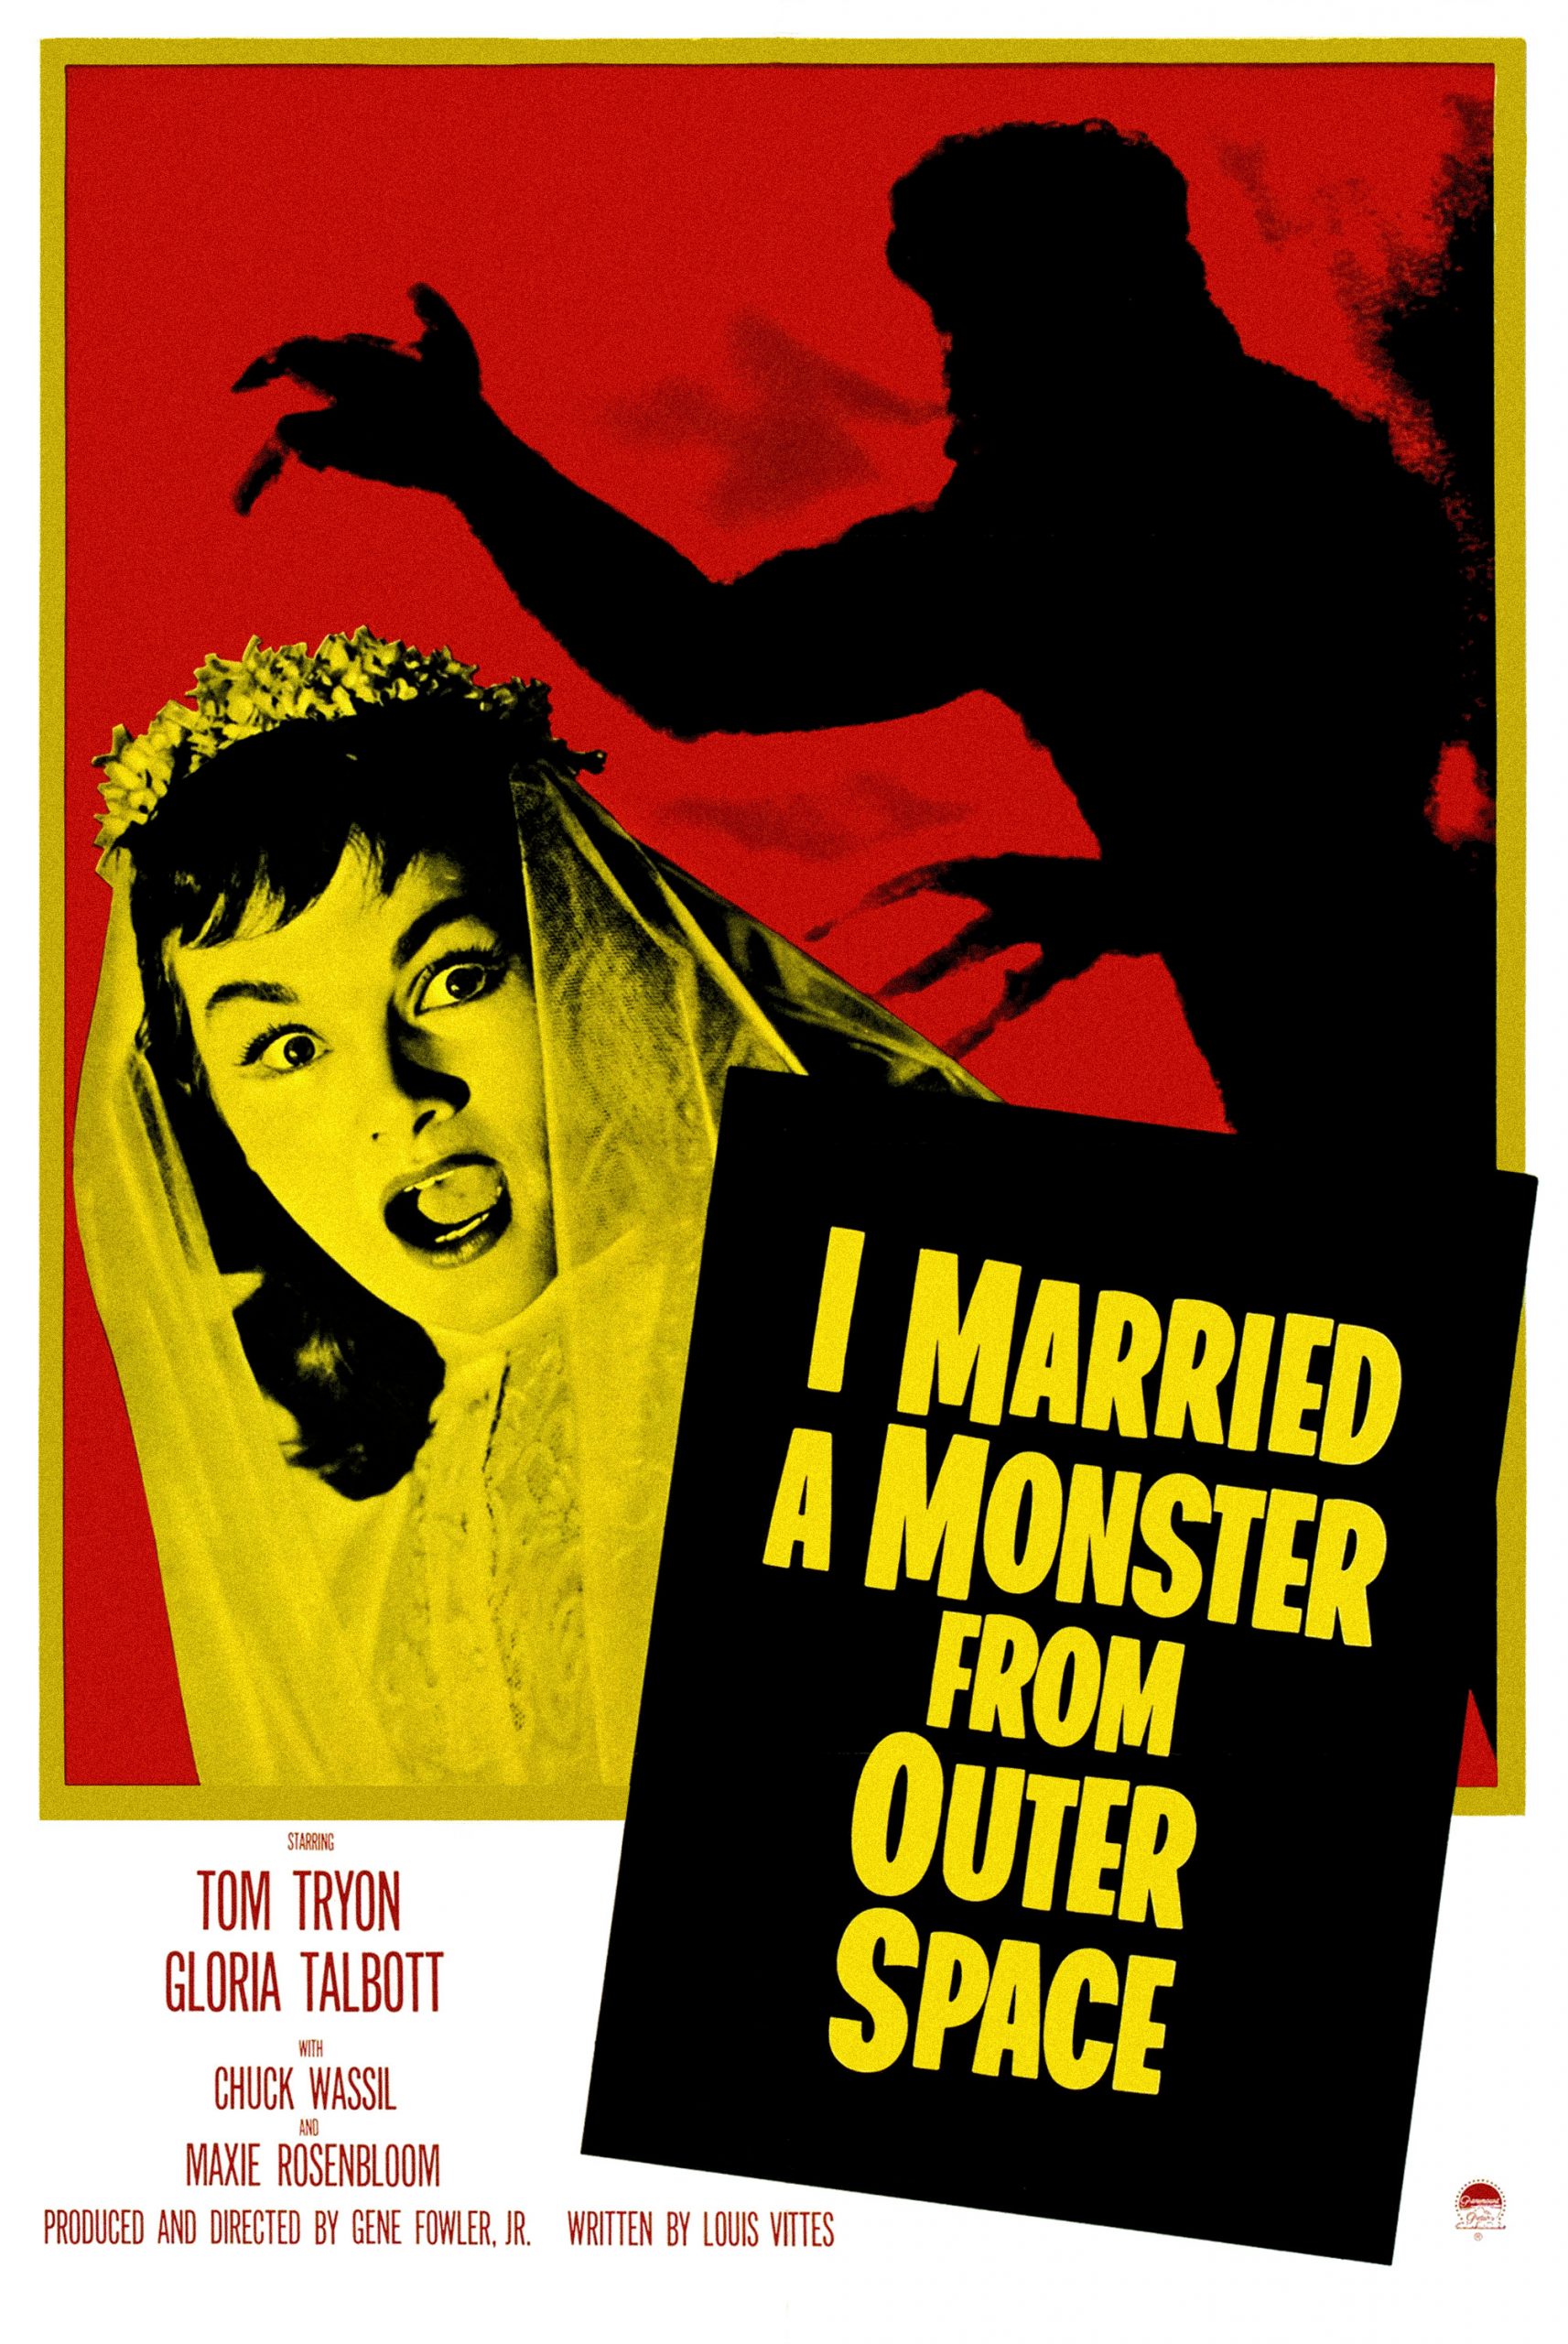 I Married a Monster from Outer Space